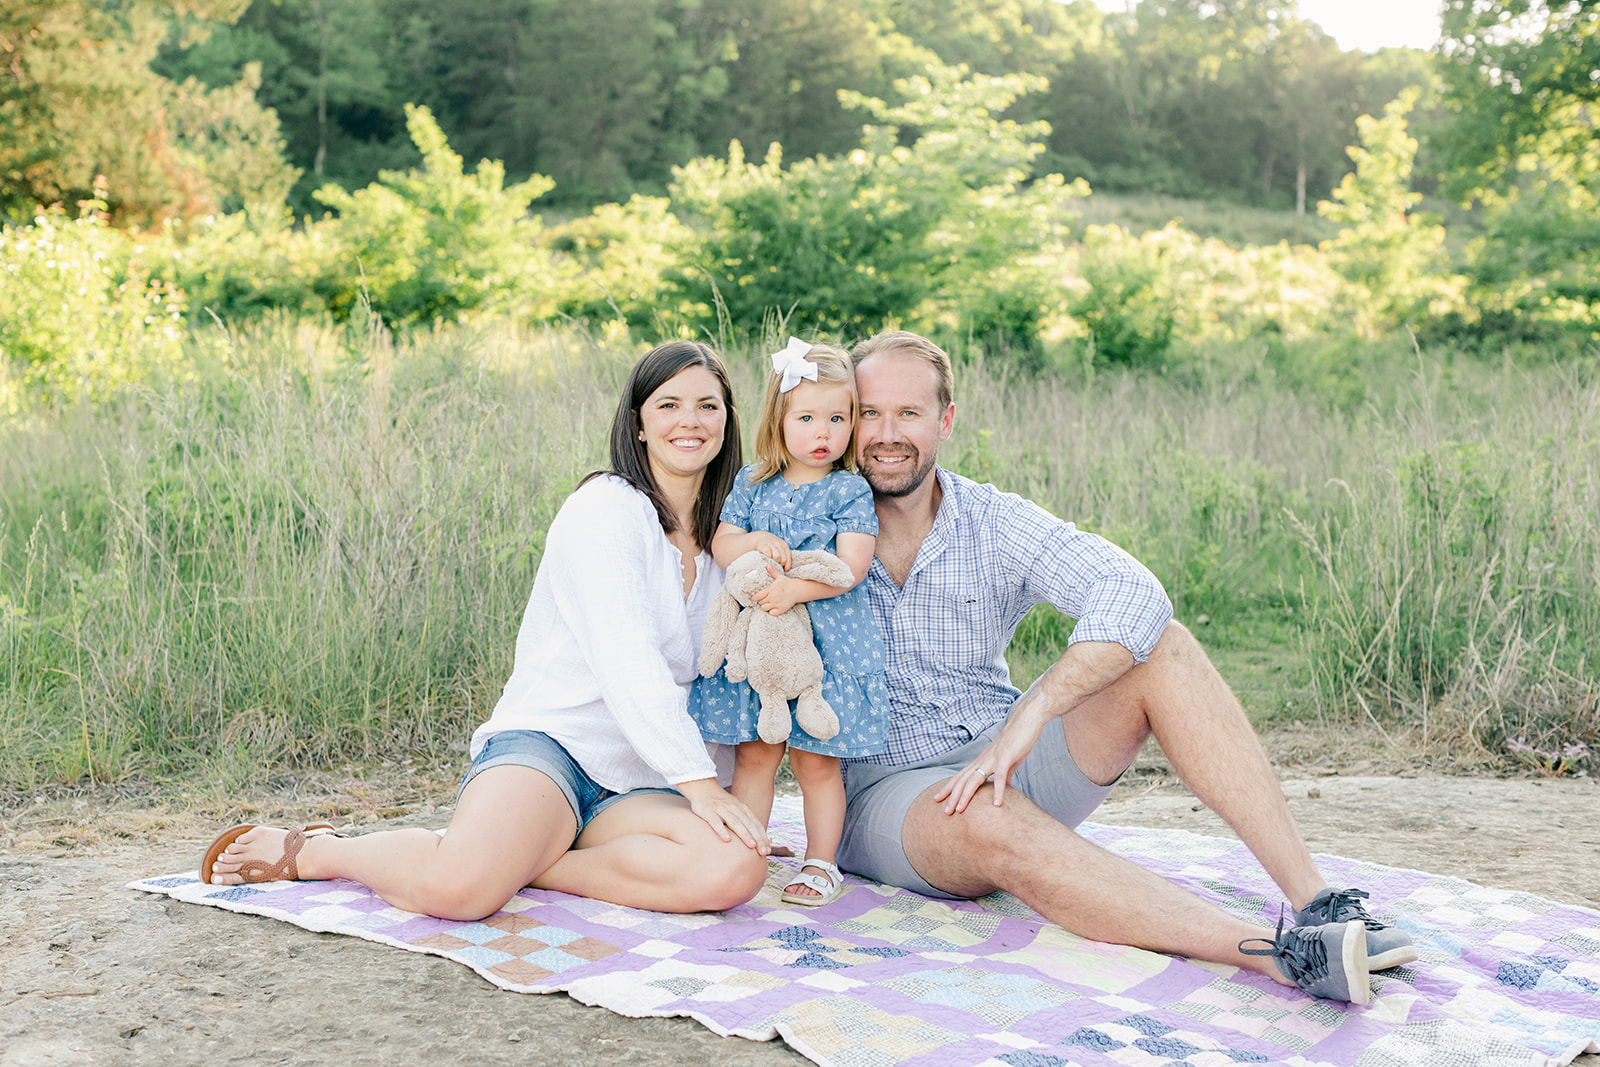 outdoor family photos for 2 year baby milestone session in nashville tennessee